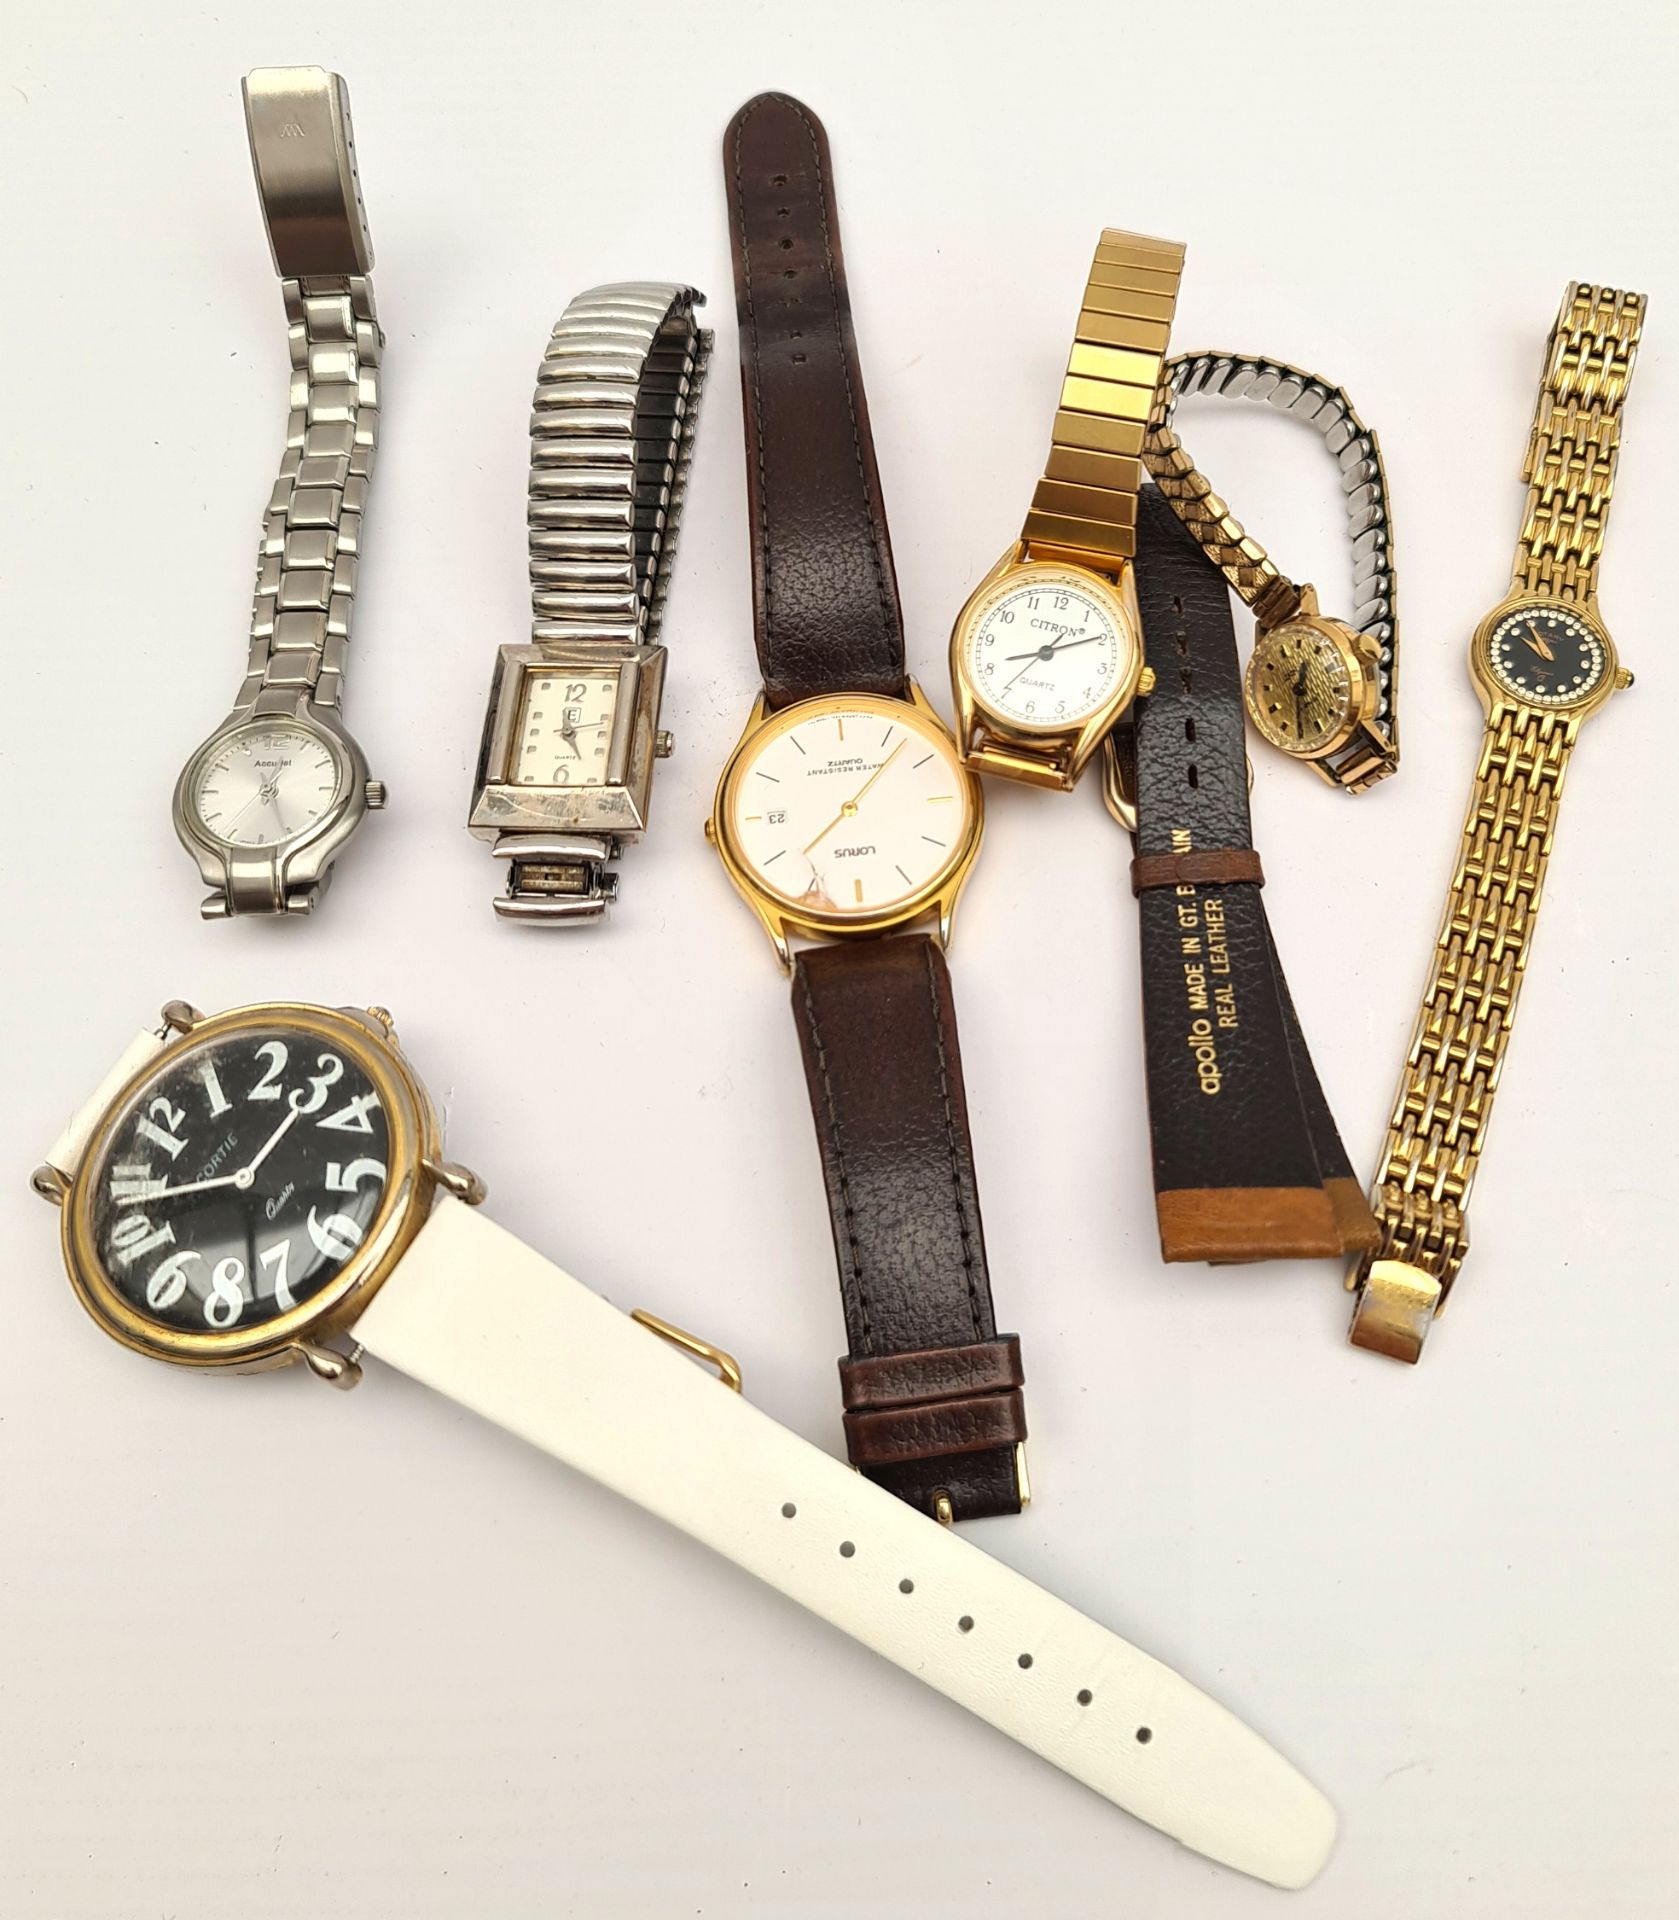 Parcel of 7 Assorted Wrist Watches